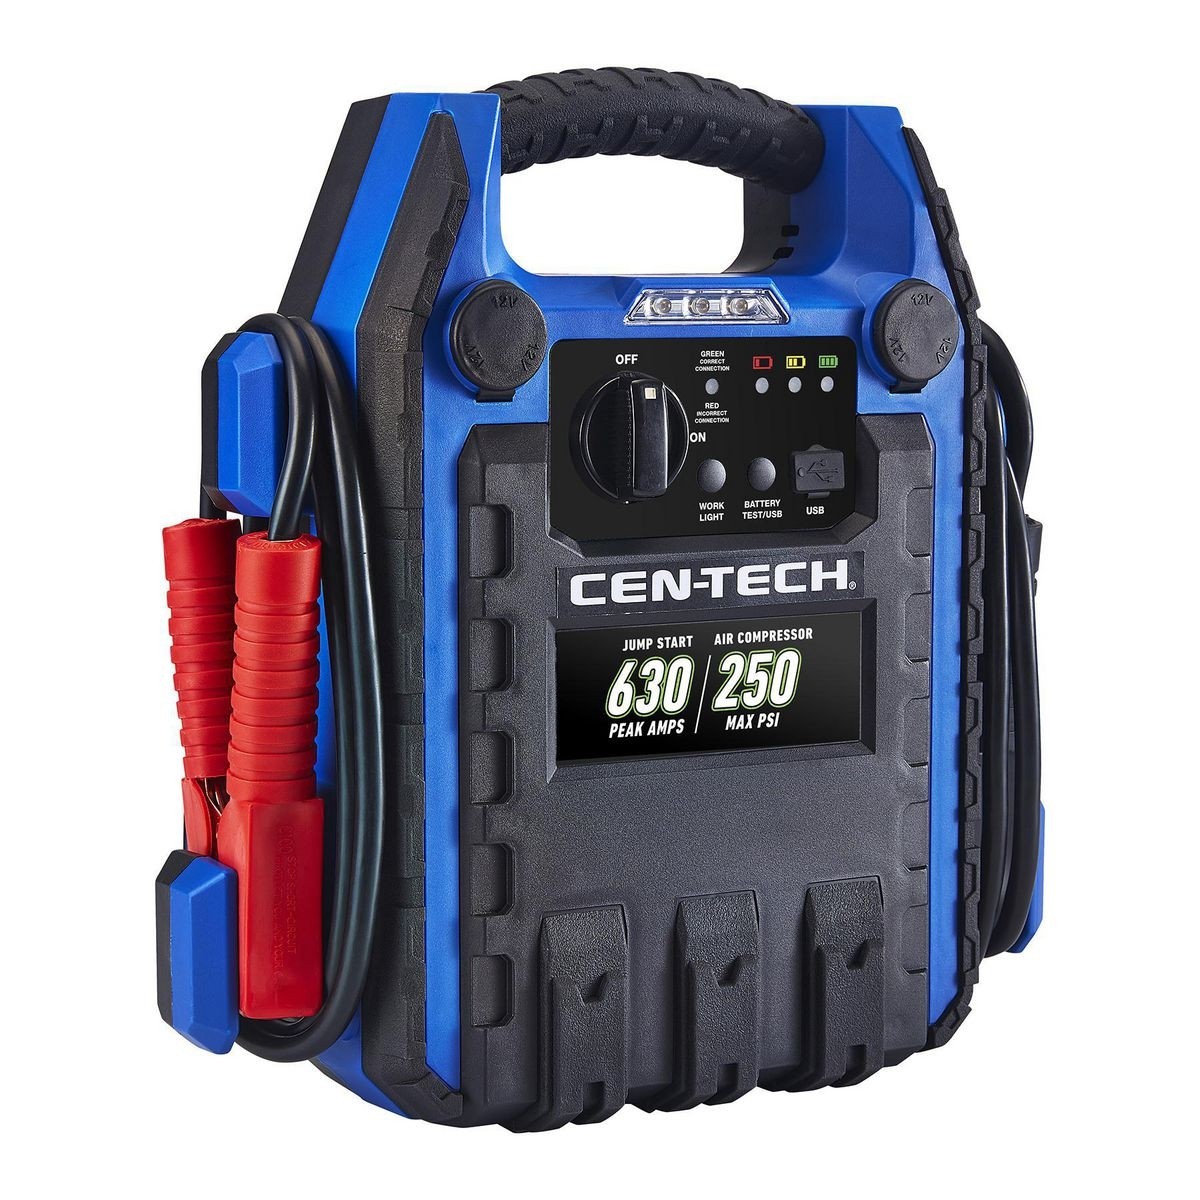 Coupons for CEN-TECH 630 Peak Amp Portable Jump Starter and Power Pack